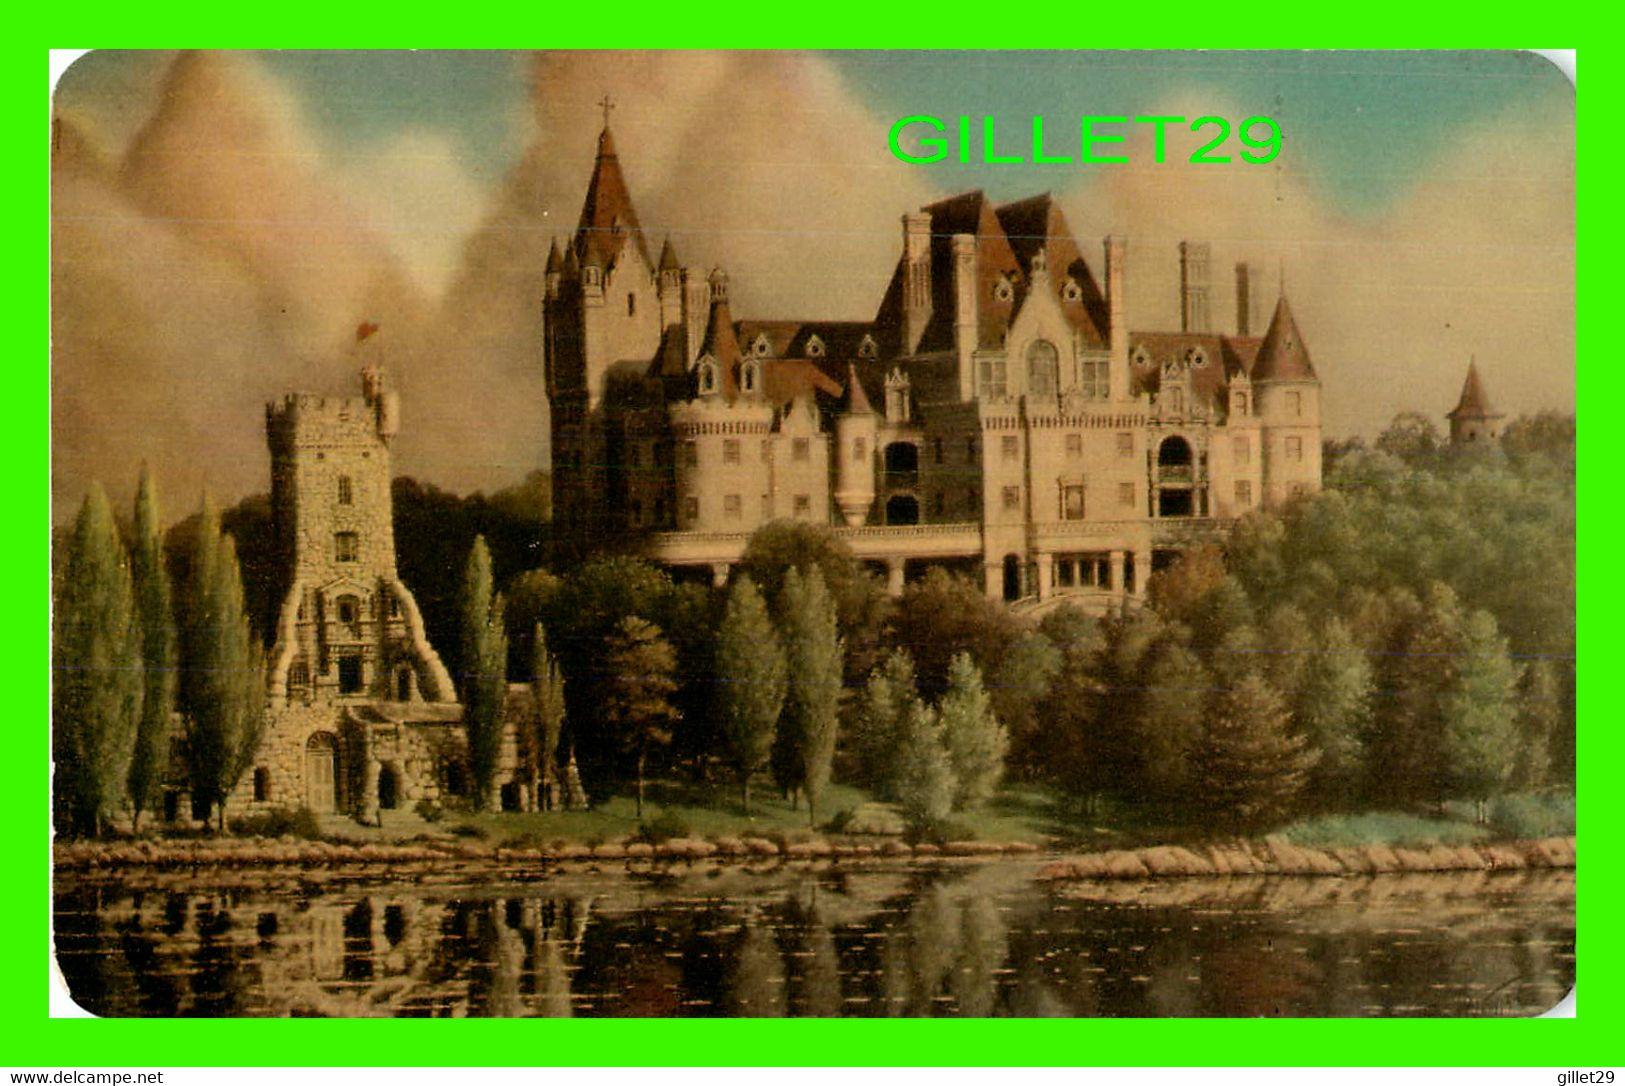 THOUSAND ISLANDS, ONTARIO - BOLDT CASTLE, ST LAWRENCE RIVER - PAINTING BY P. McKENZIE - PHOTOGELATINE ENGRAVING - - Thousand Islands